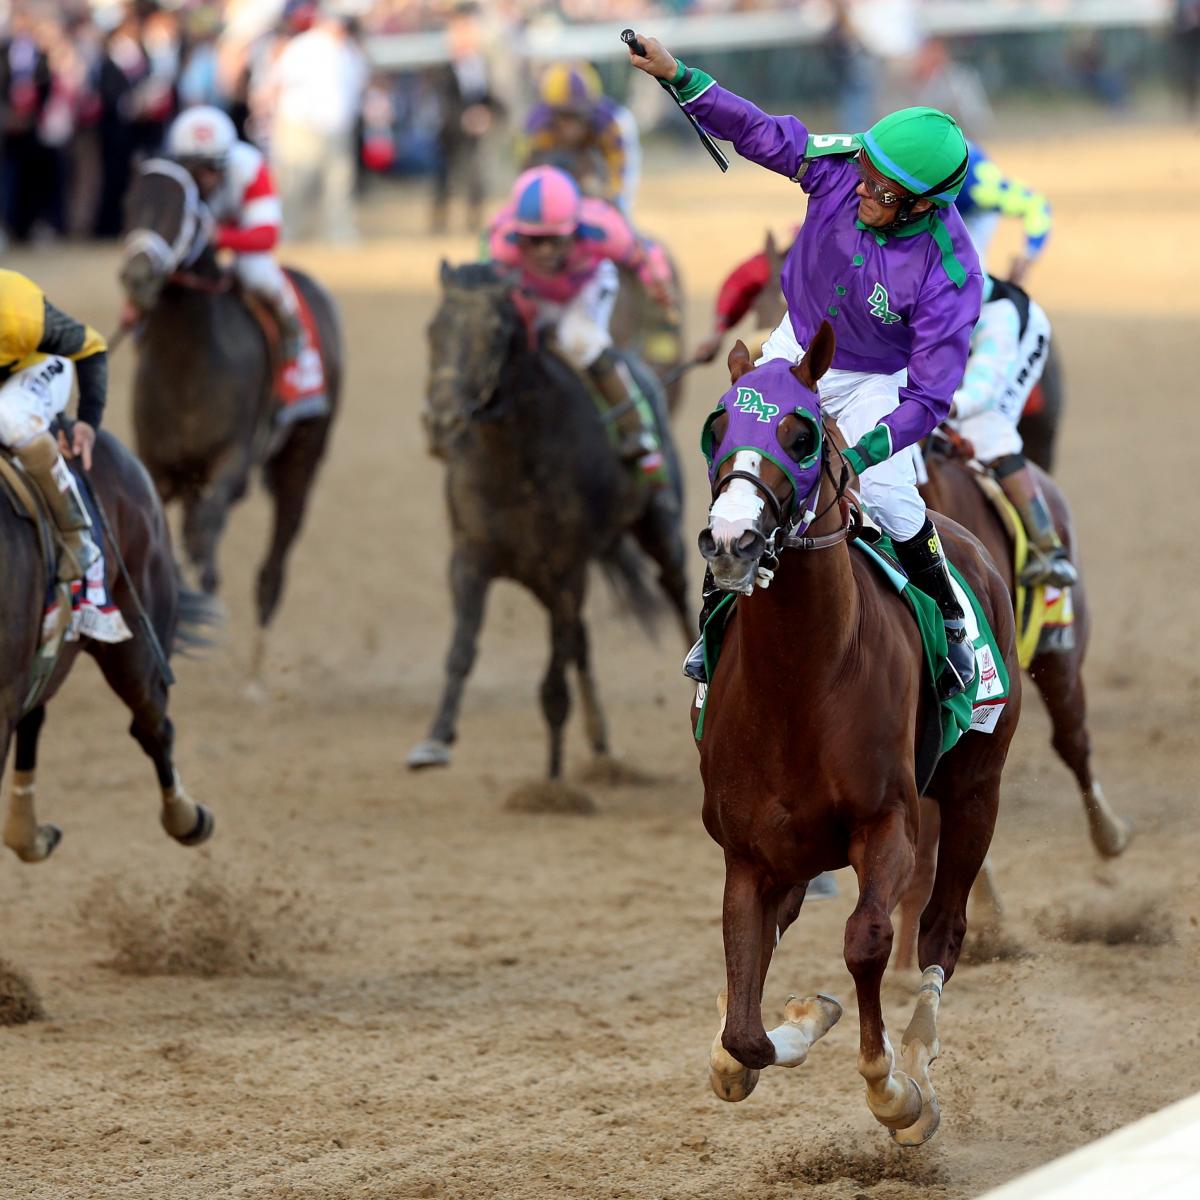 Kentucky Derby 2014 Live Results, Updates and Reaction News, Scores